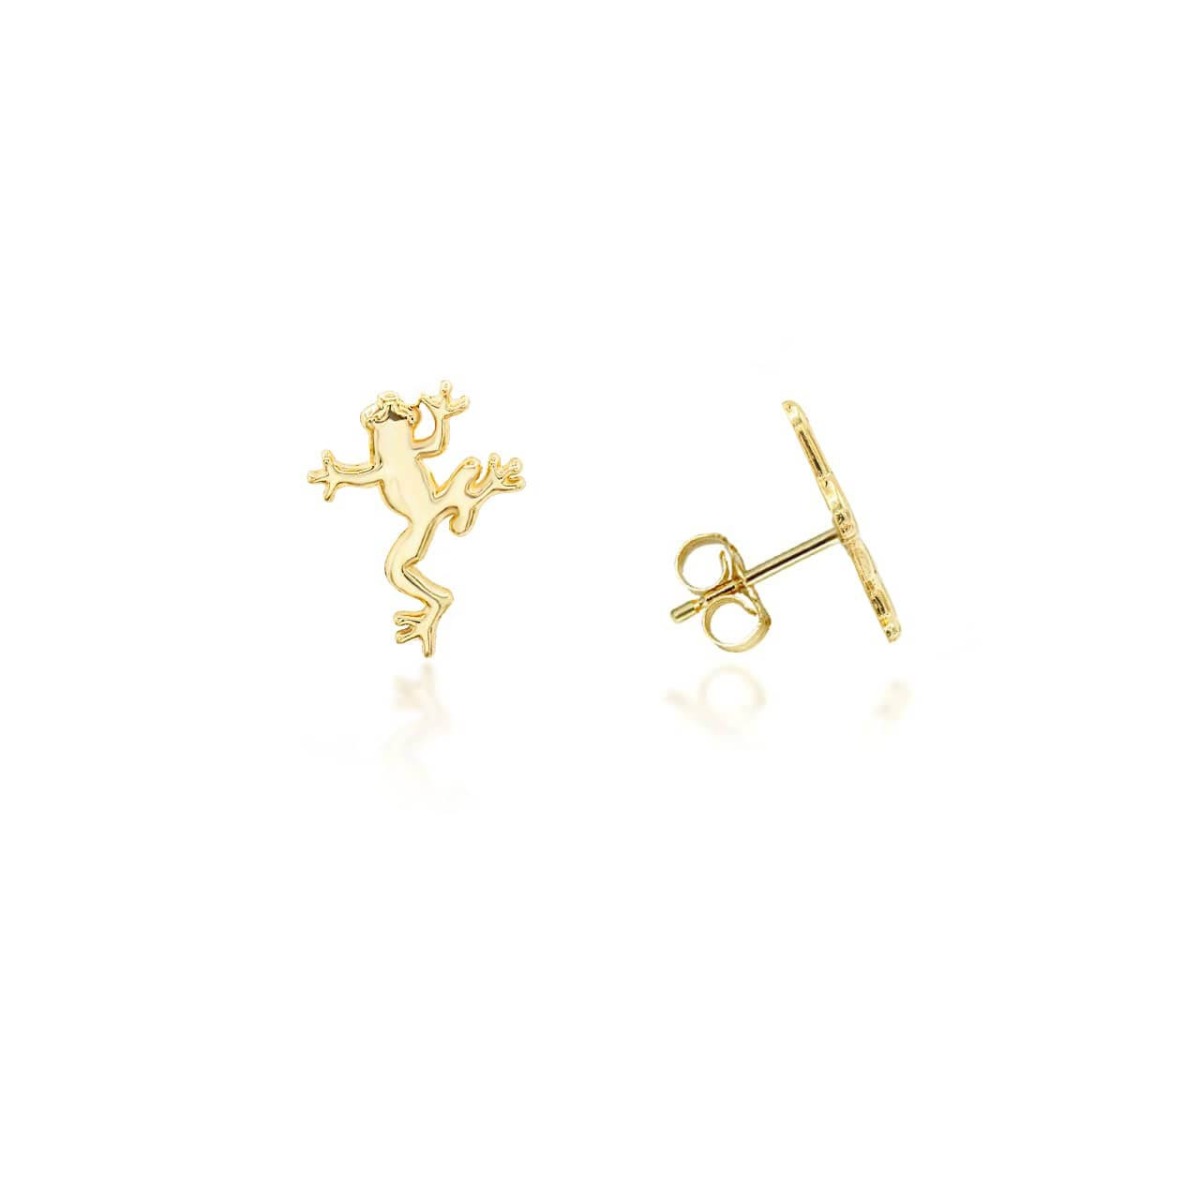 Man Gold Earrings at Gold Boutique GOOFASH